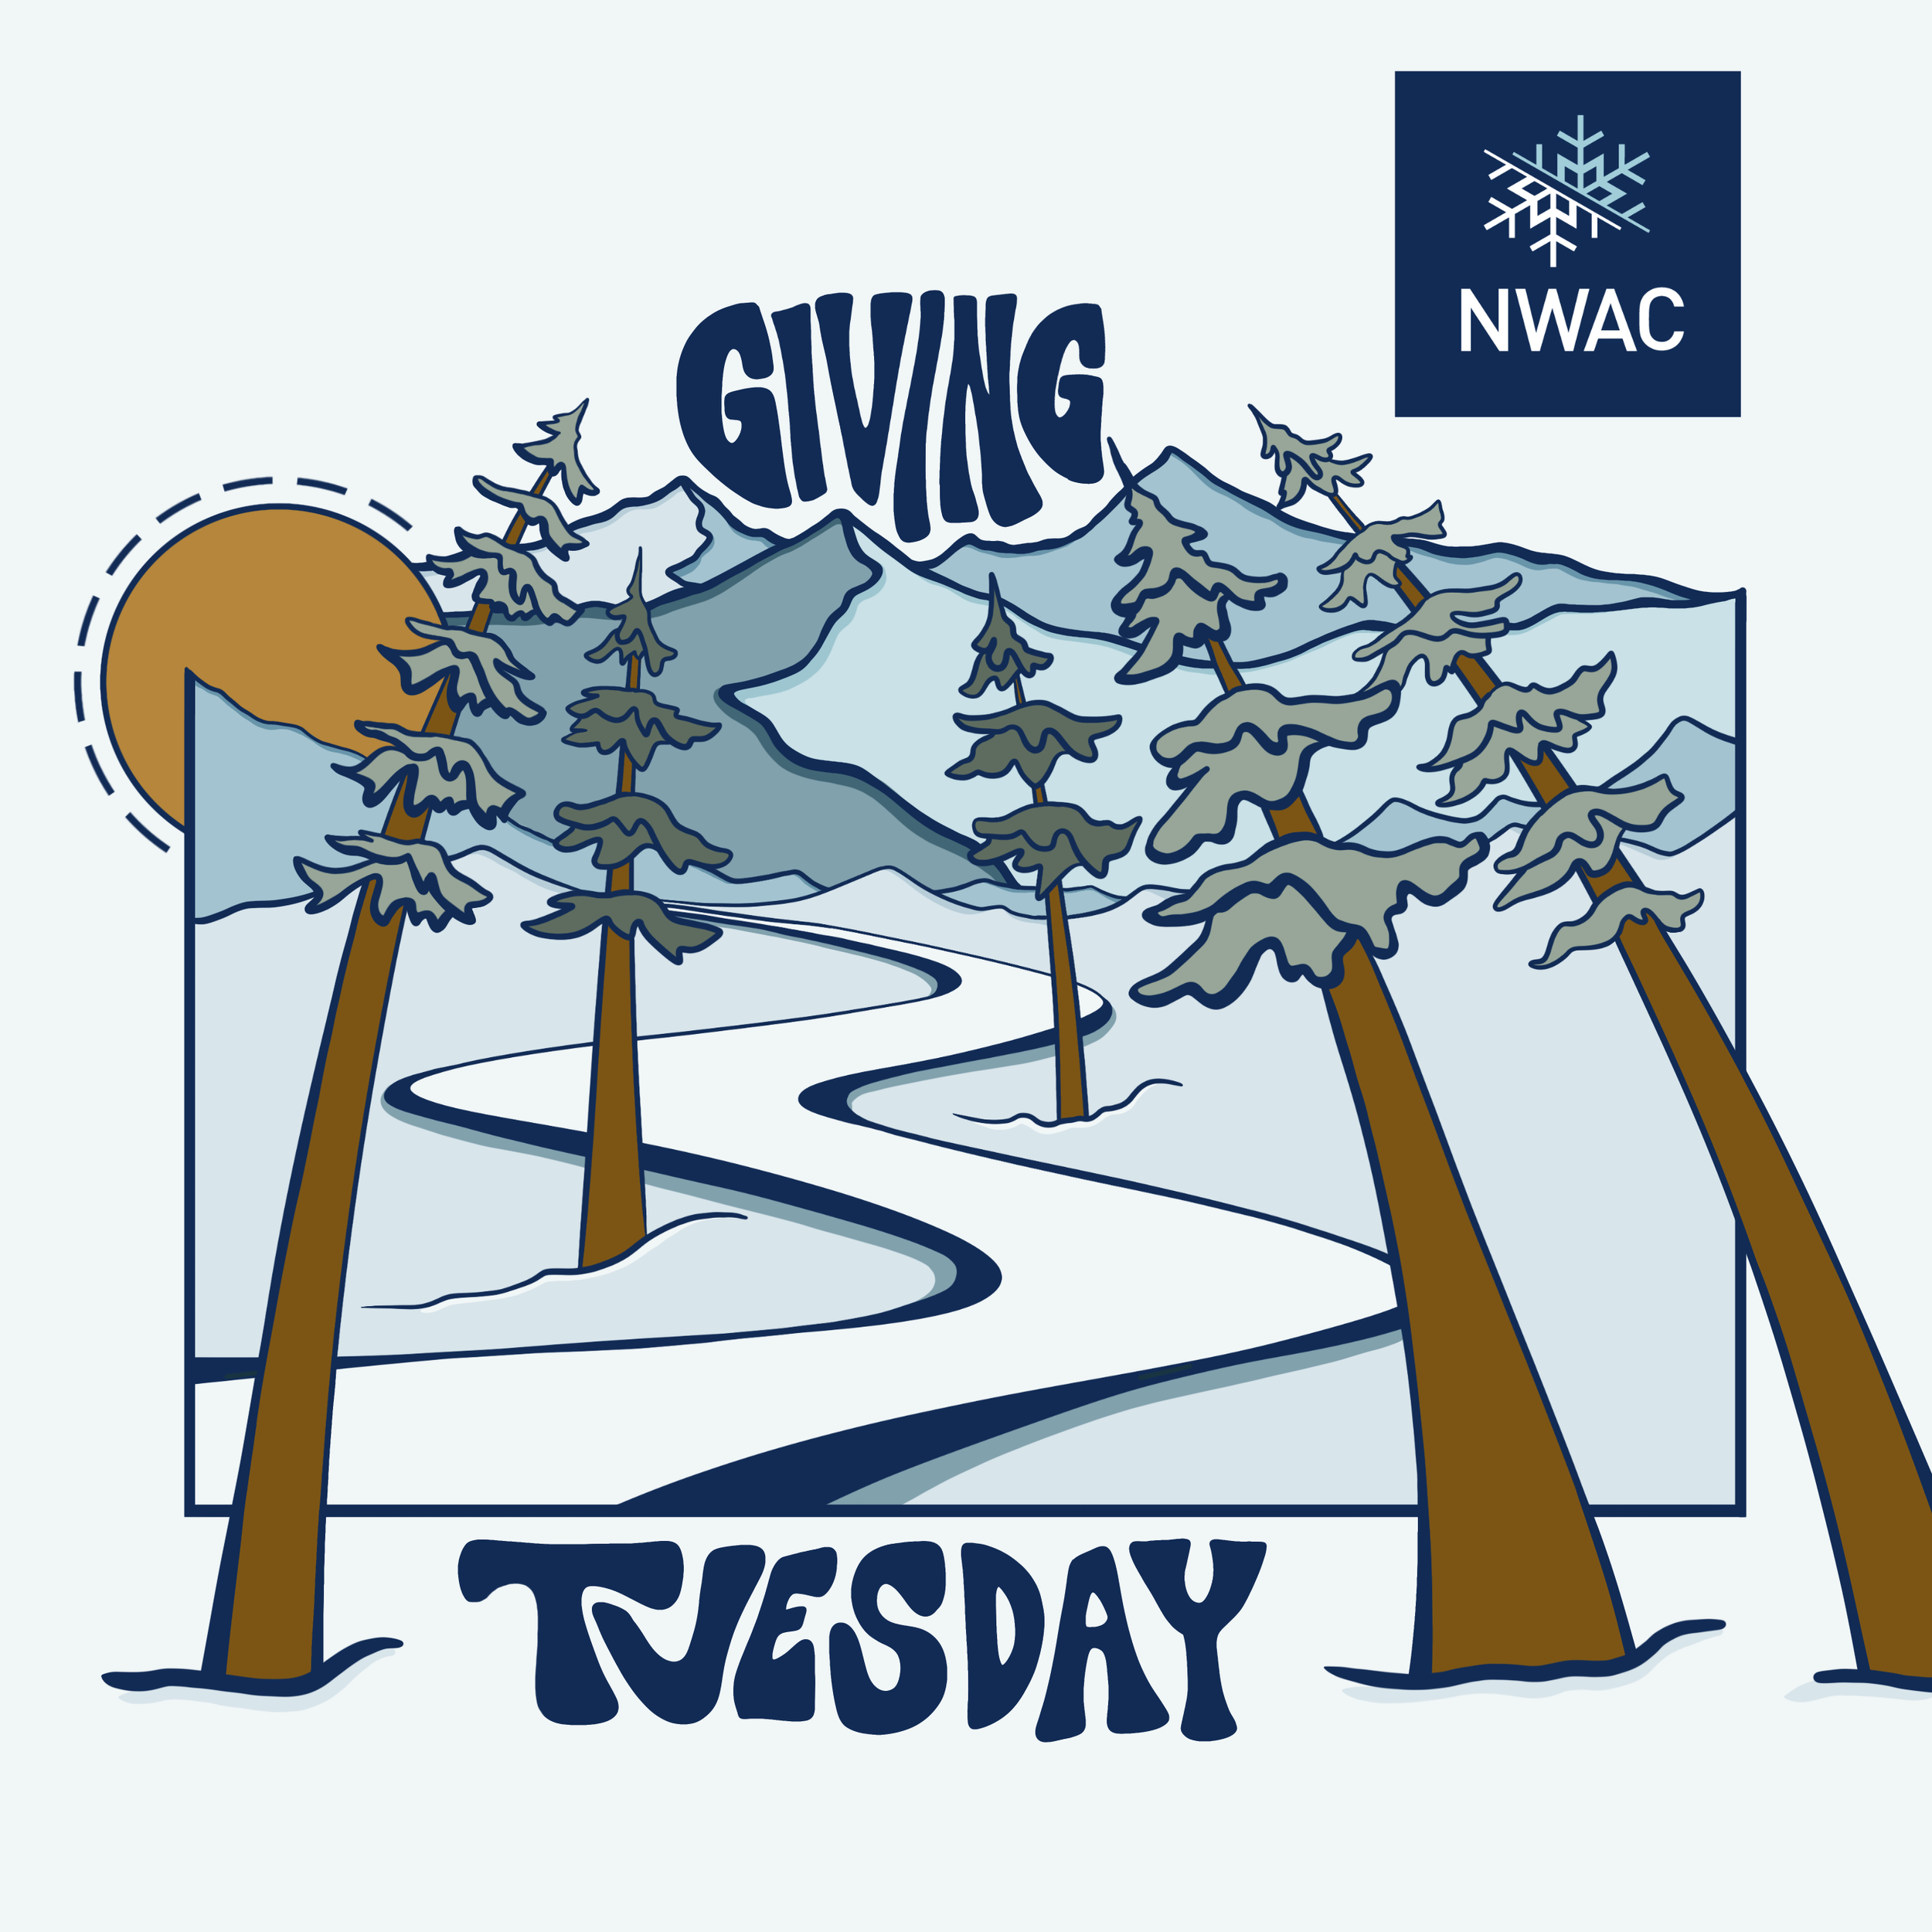 nwac giving tuesday square final .png